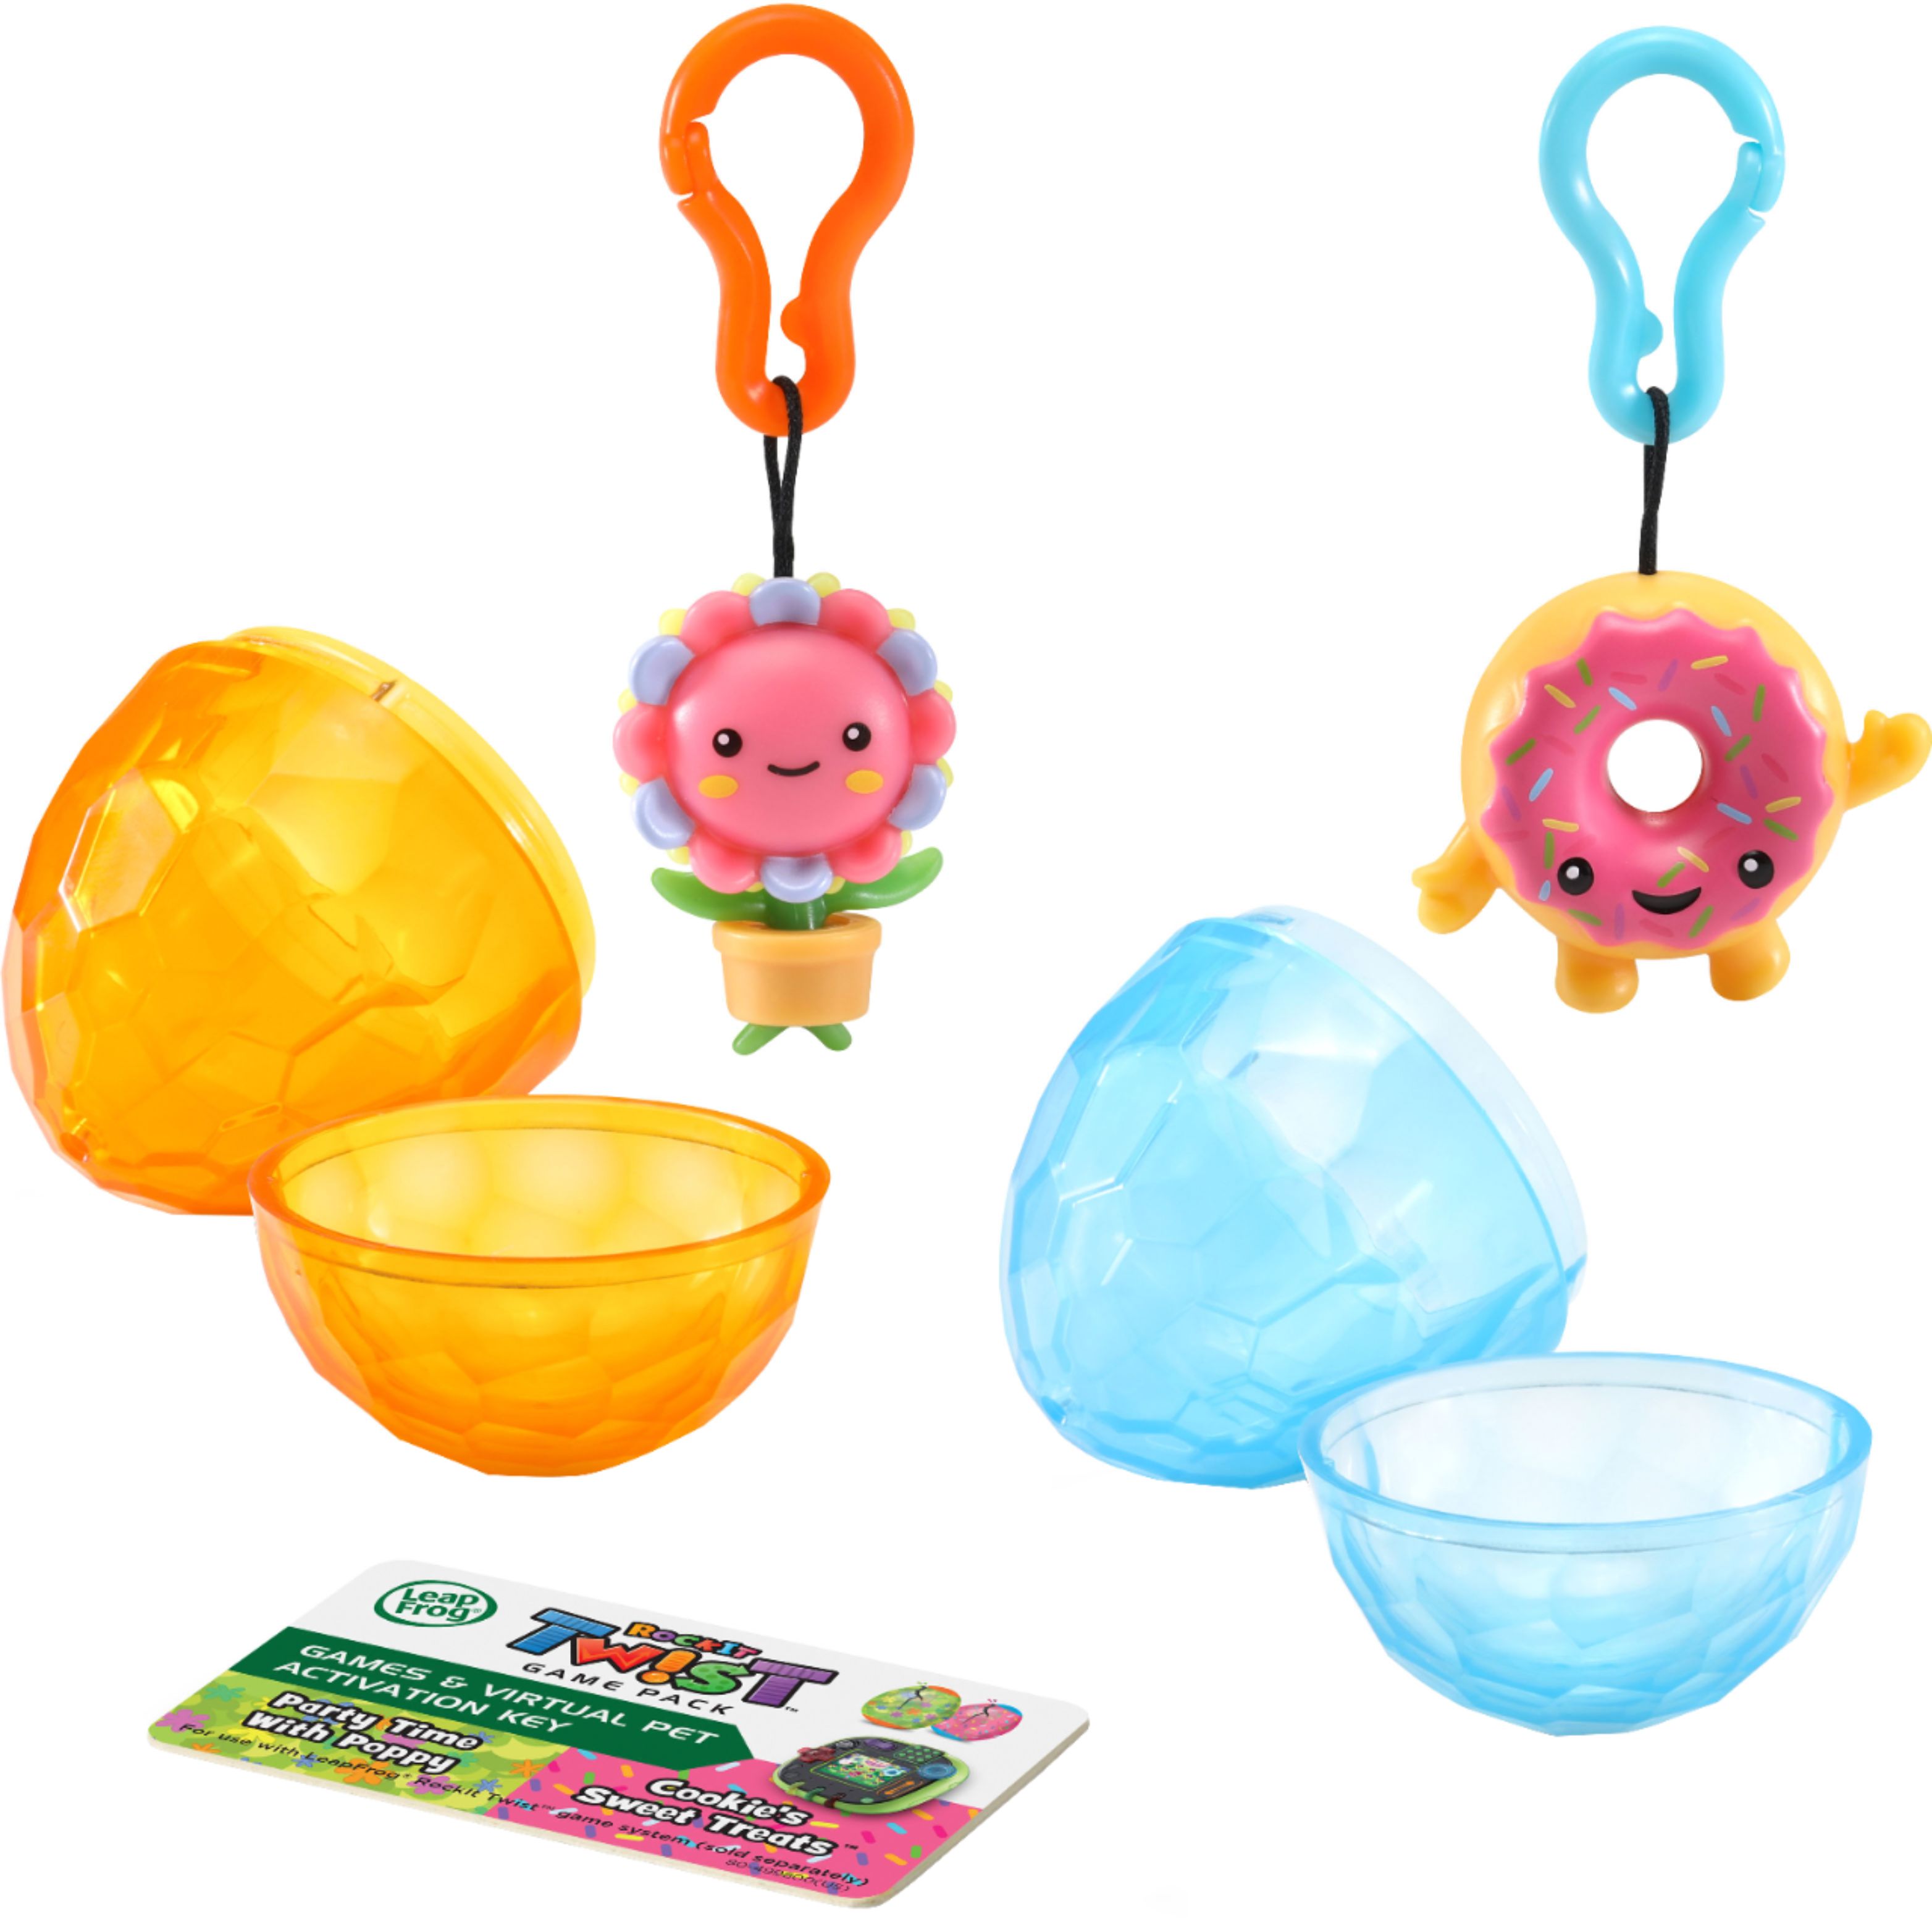 LeapFrog Rockit Twist Game Pack Cookie's Sweet Treats for sale online